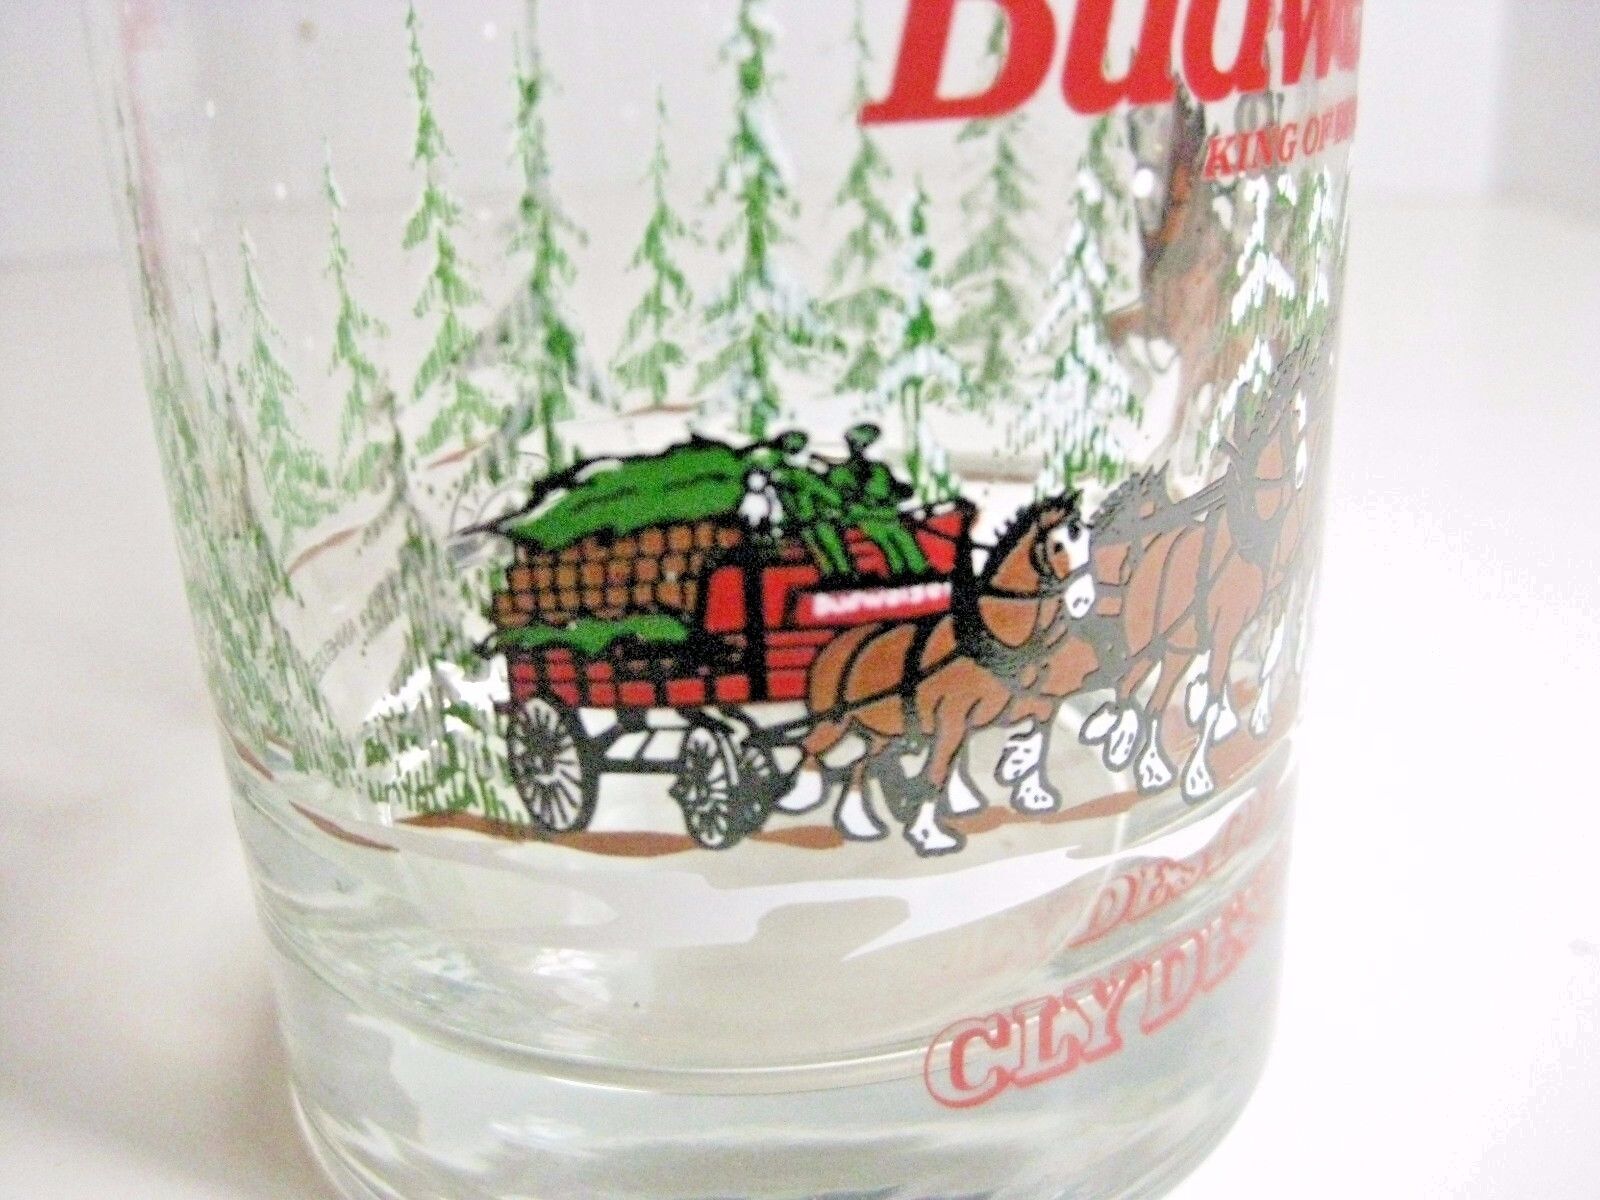  BUDWEISER BEER GLASSES ONE IS 1989 CLYDESDALES  BAR WARE 2 DIFFERENT TYPES Budweiser - фотография #4